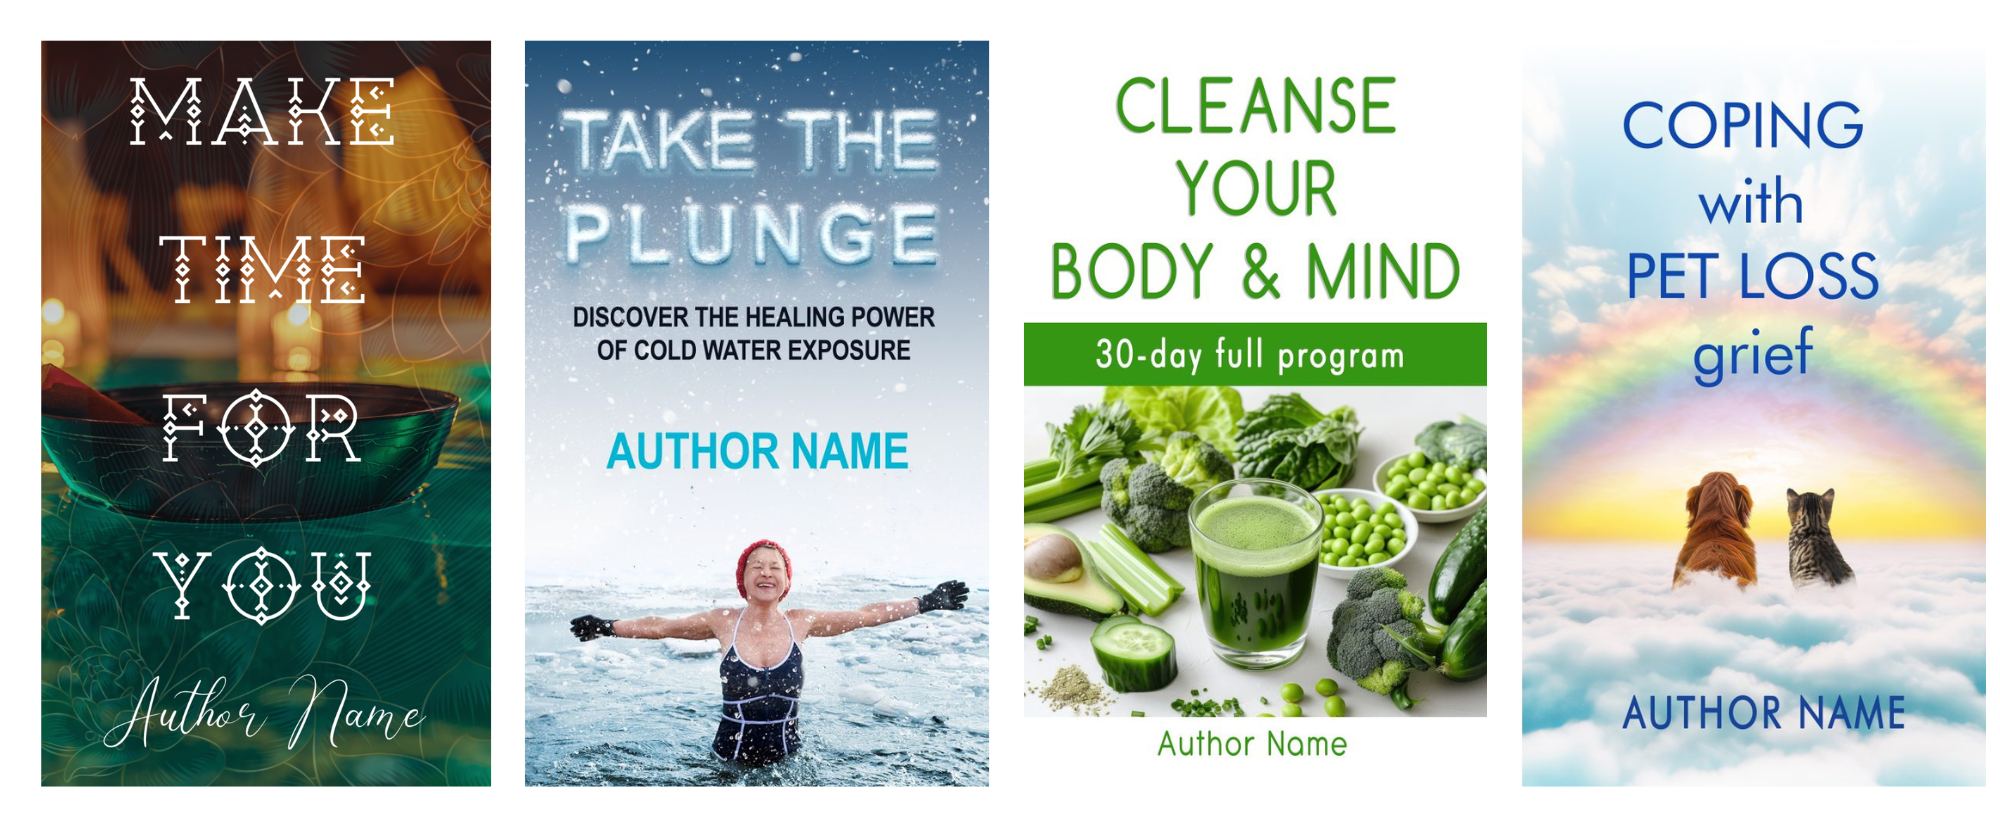 Four book covers are displayed. From left to right: 
1. "Make Time for You" with abstract light patterns.
2. "Take the Plunge" shows a person swimming in cold water.
3. "Cleanse Your Body & Mind" with various green vegetables and a smoothie.
4. "Coping with Pet Loss Grief" with a dog and cat looking at a rainbow. BookSelf Book Cover Design & Premade Book Covers